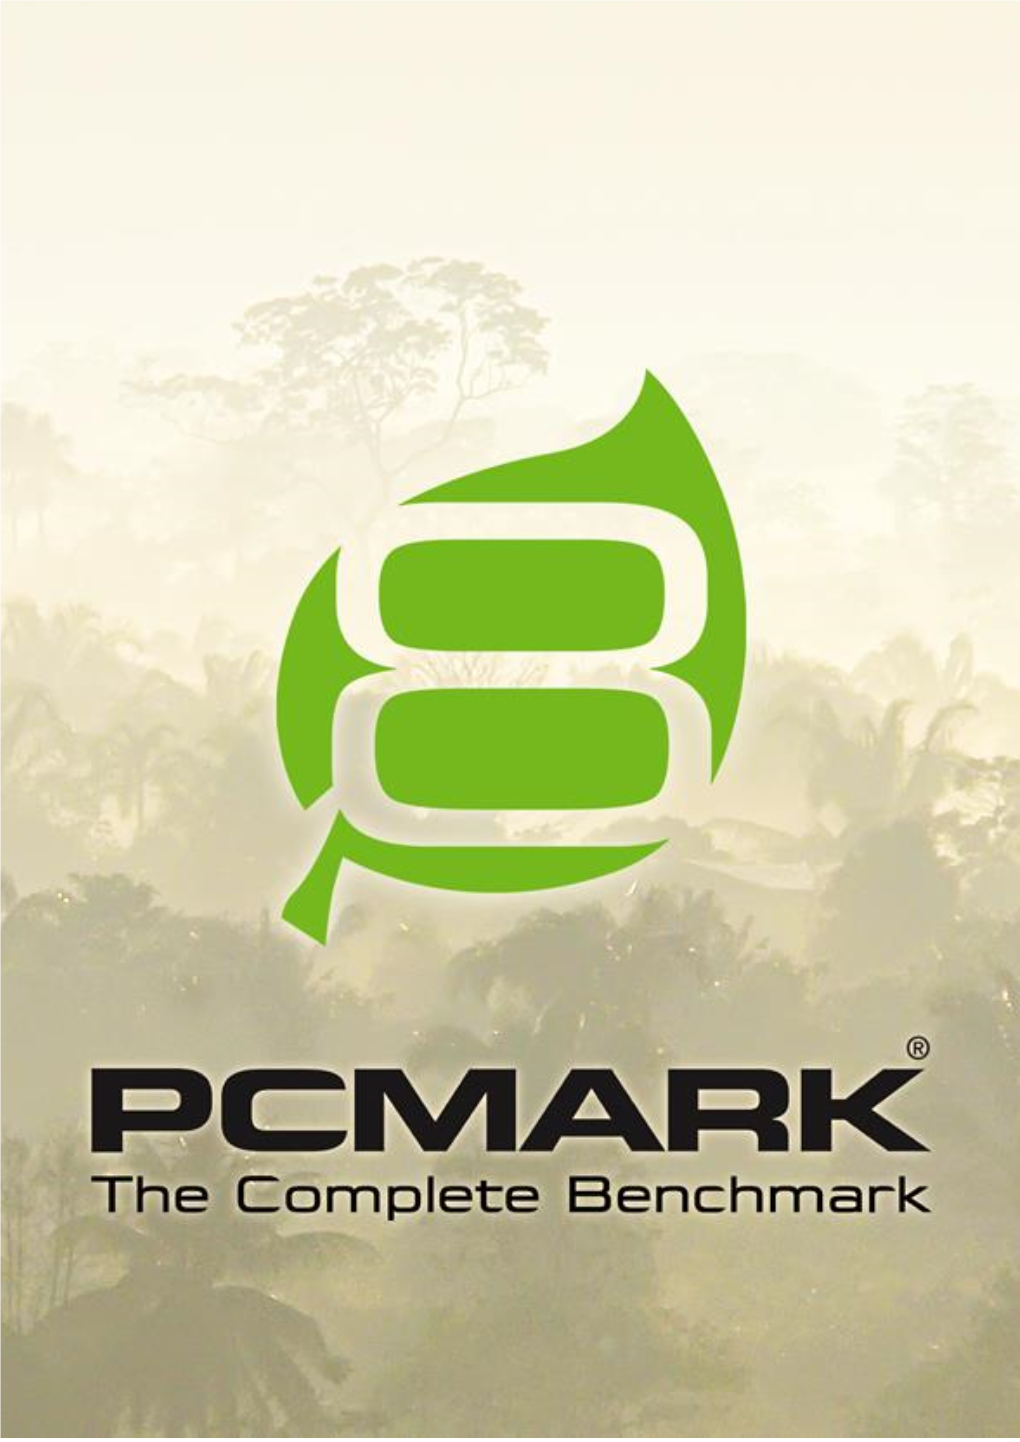 What Is Pcmark 8?